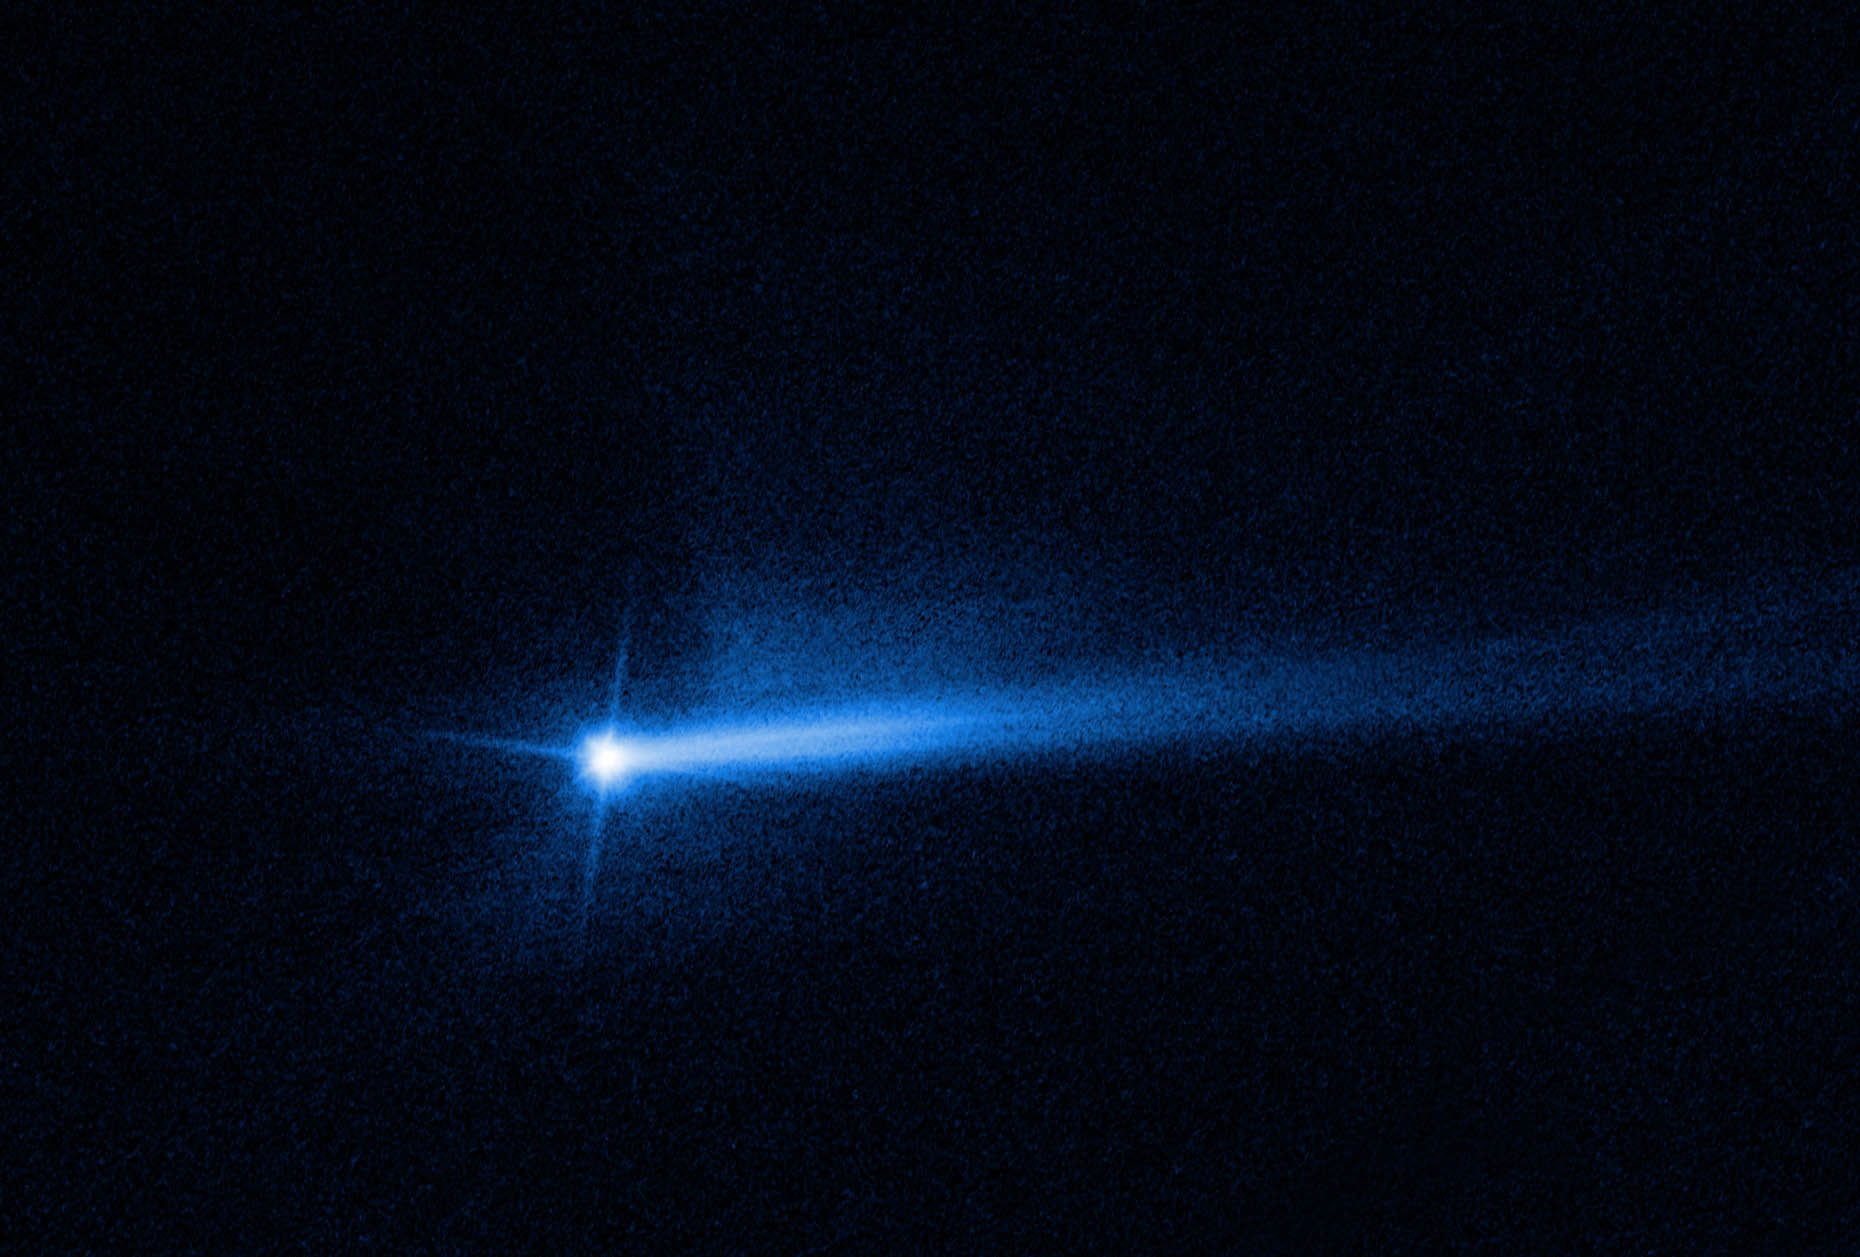 A bright blue spot is at the left-center of the image, which has a black background. The spot is the Didymos-Dimorphos system after impact from the DART spacecraft. The center bright spot has 3 diffraction spikes extending from its core at the 1 o’clock, 7 o’clock, and 10 o’clock positions. There is a small amount of dusty haze just below the southern pole of the center dot. Two tails of ejecta that appear as white streams of material extend out from the center at the 2 o’clock and 3 o’clock positions.